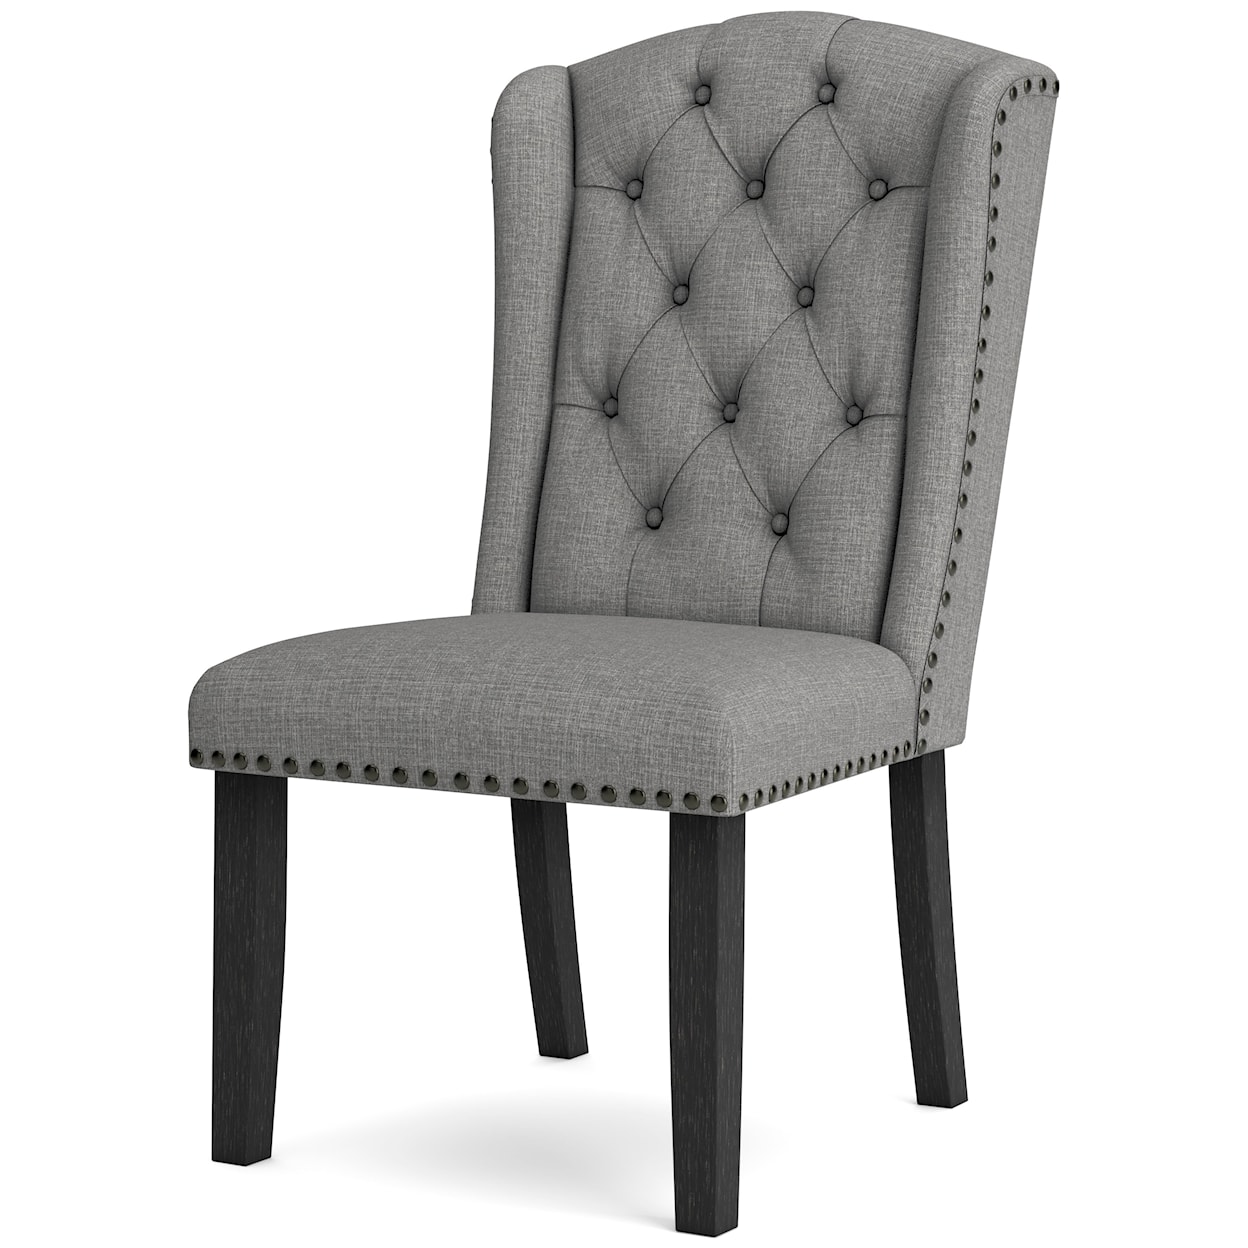 Signature Jeanette Dining Chair